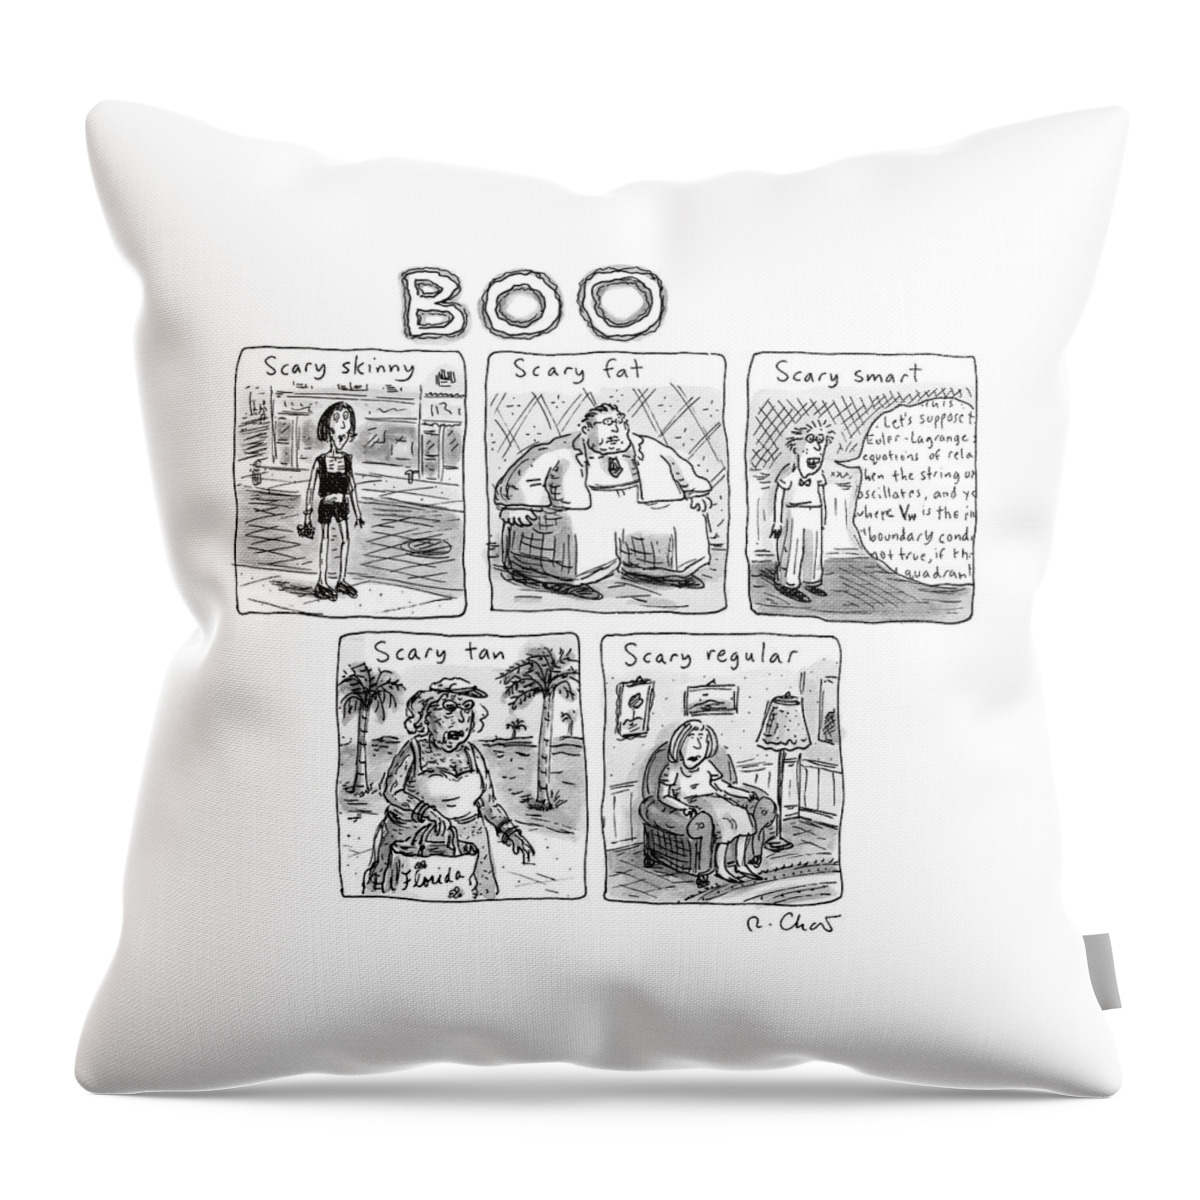 Five Different Pictures Are Shown Below The Title Throw Pillow